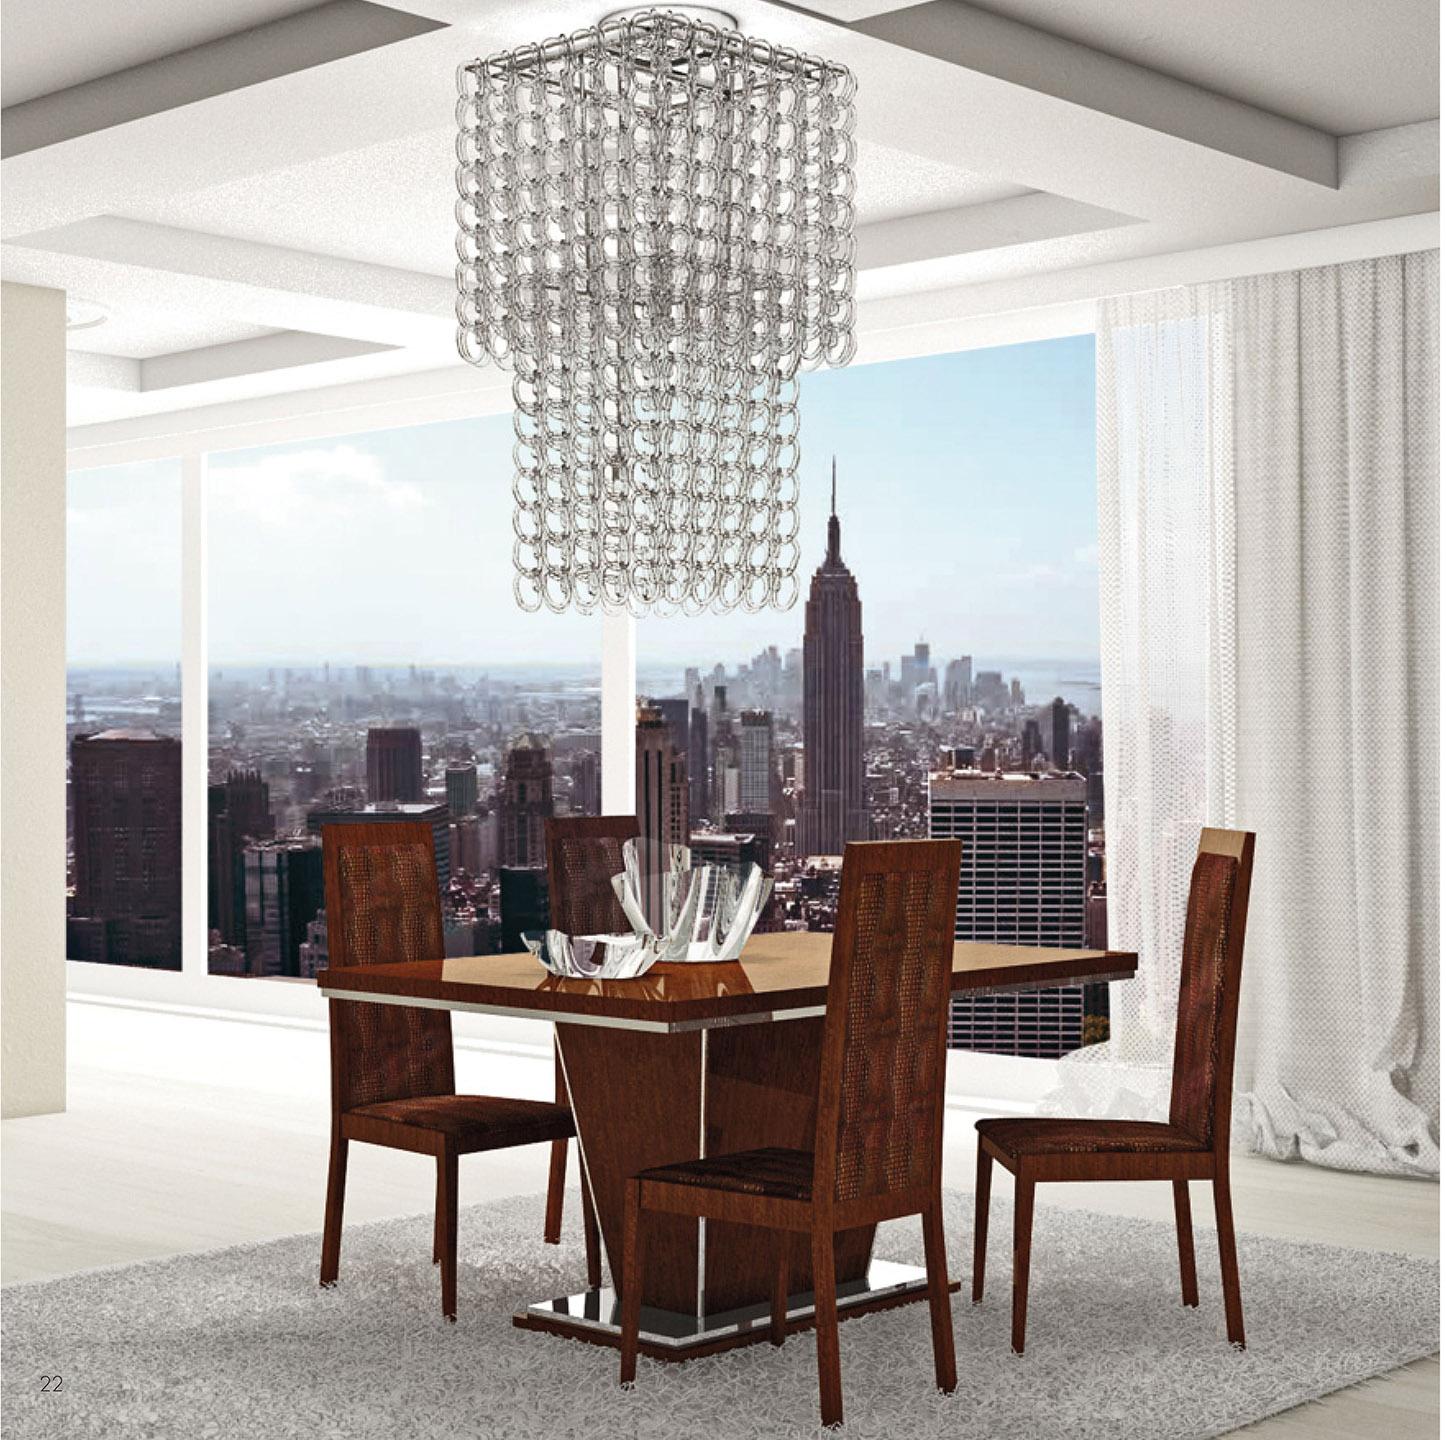 

    
At Home USA Caprice Glossy Walnut Luxury Ultra-Modern Dining Table Contemporary
